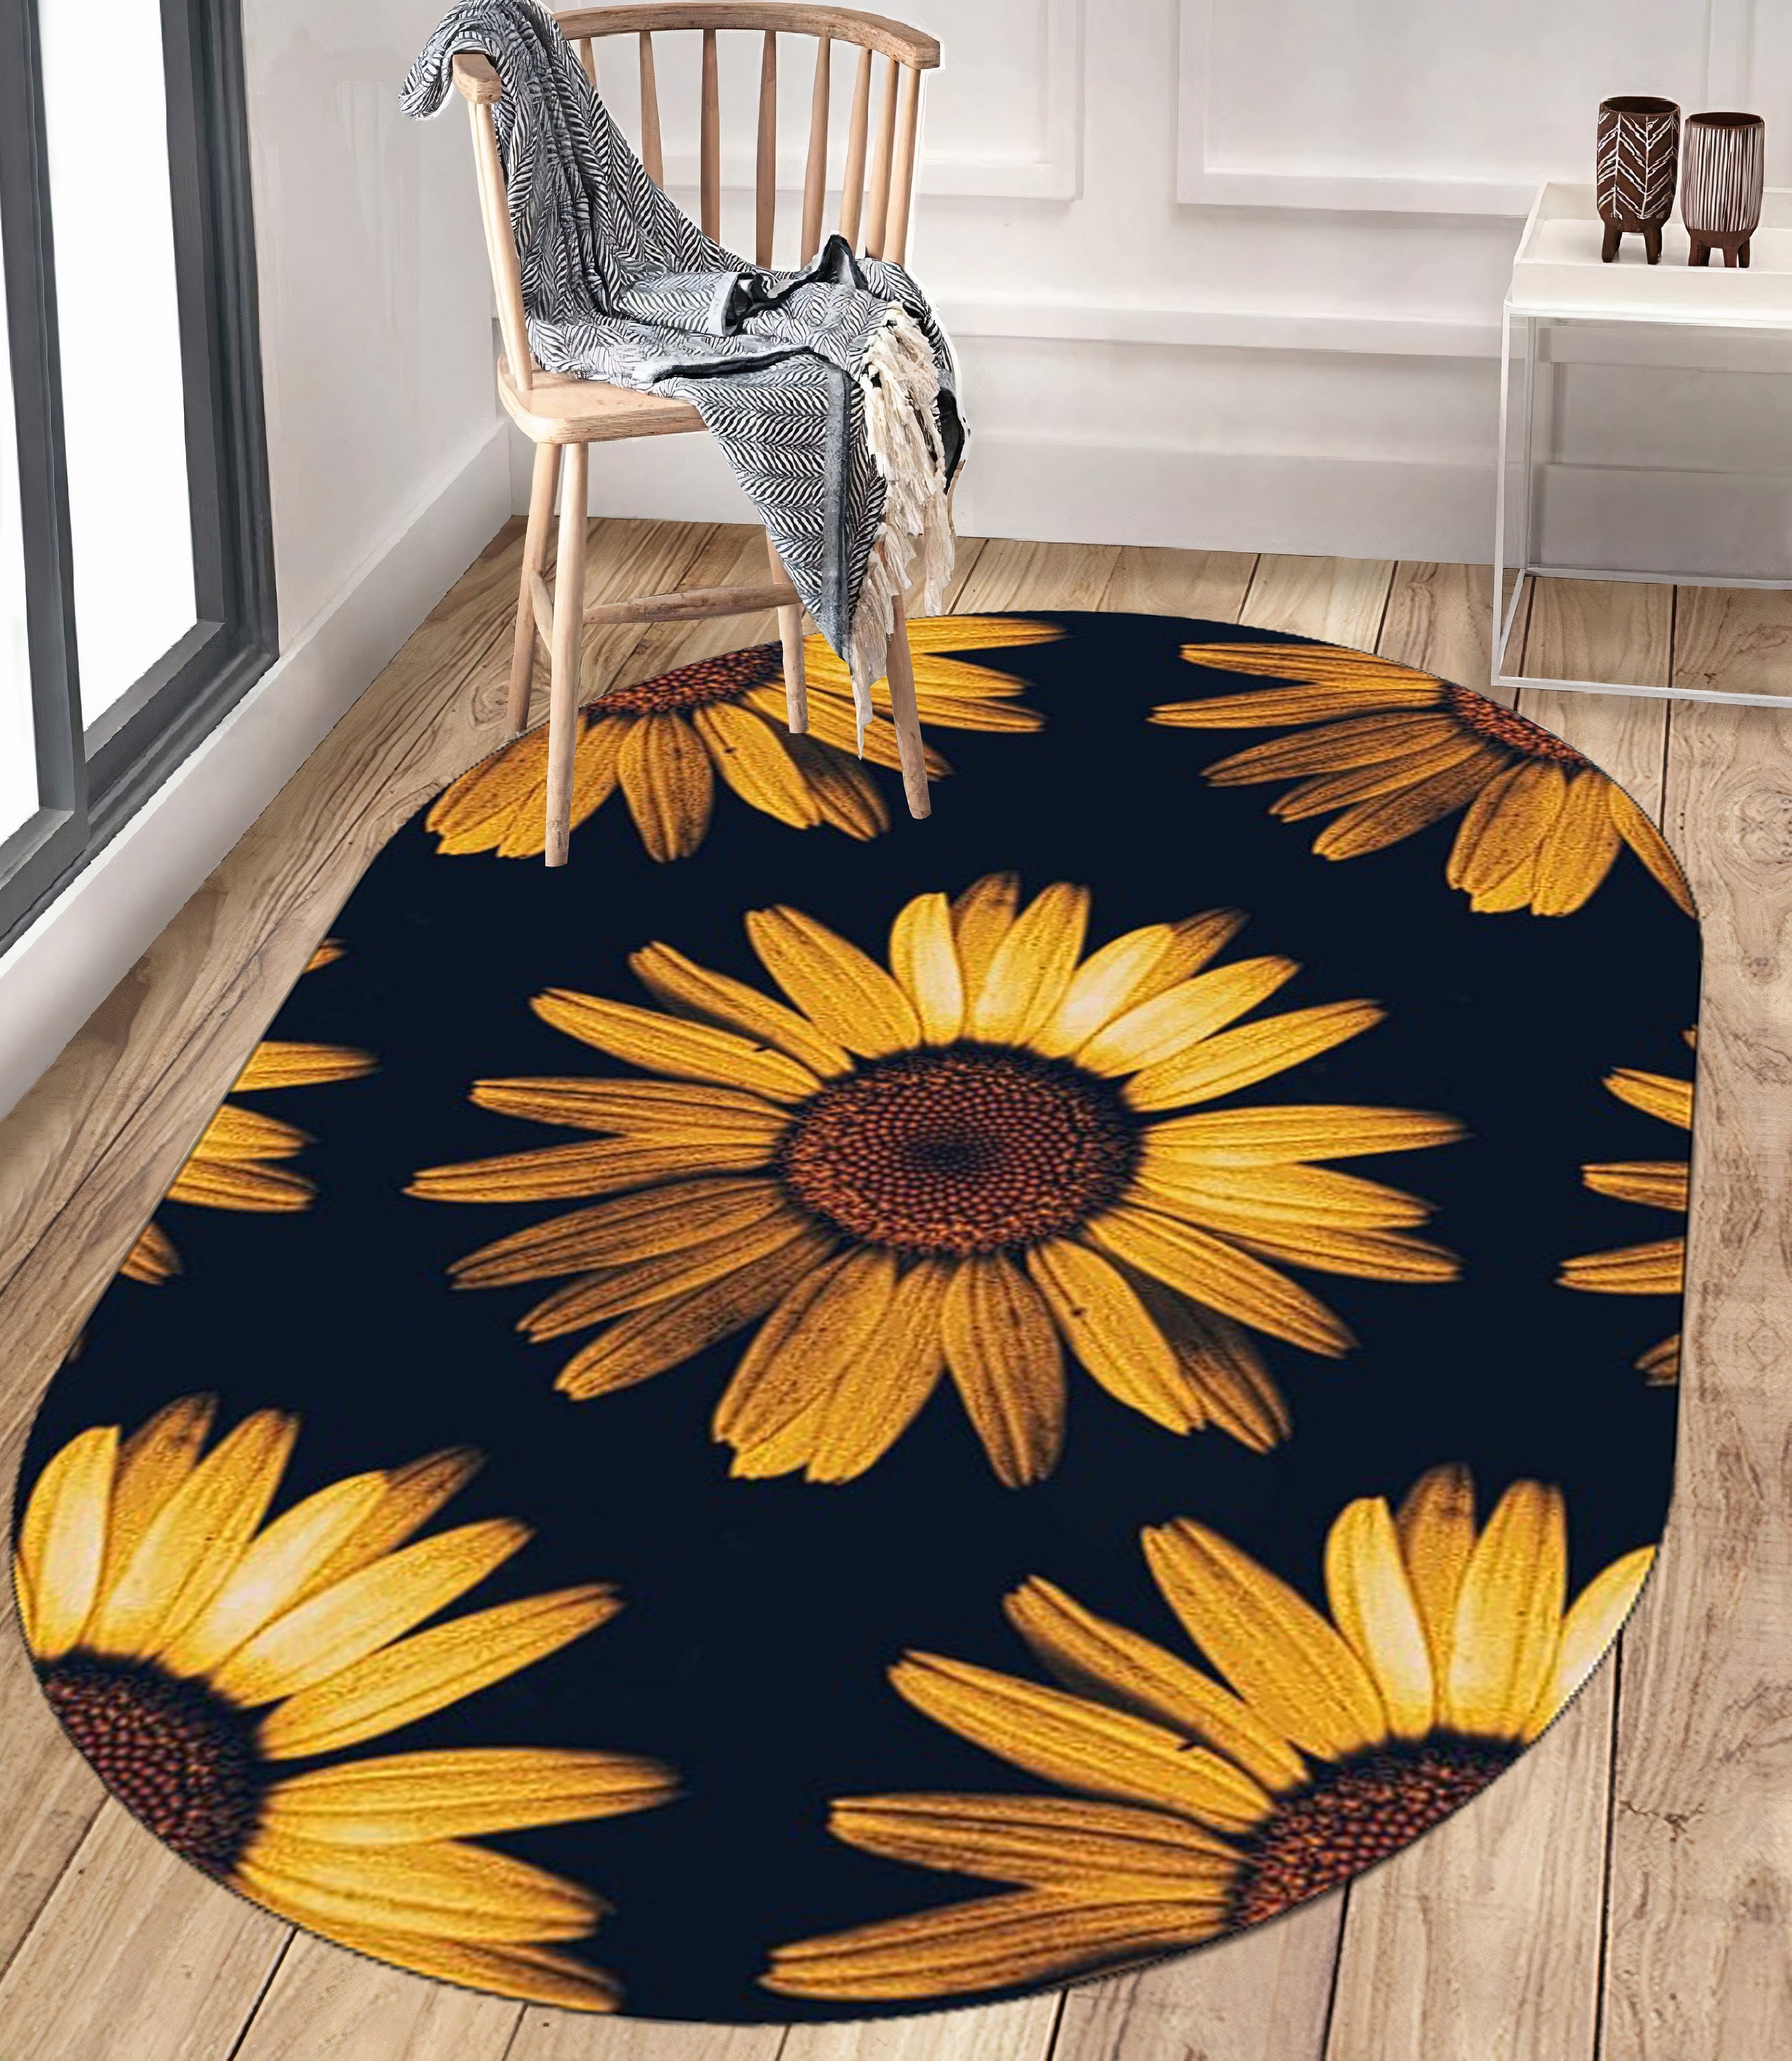 Sunflowers Rug yellow colorful floral rugs 2x3 3x5 4x6 5x7 8x10 large –  Celesky Designs